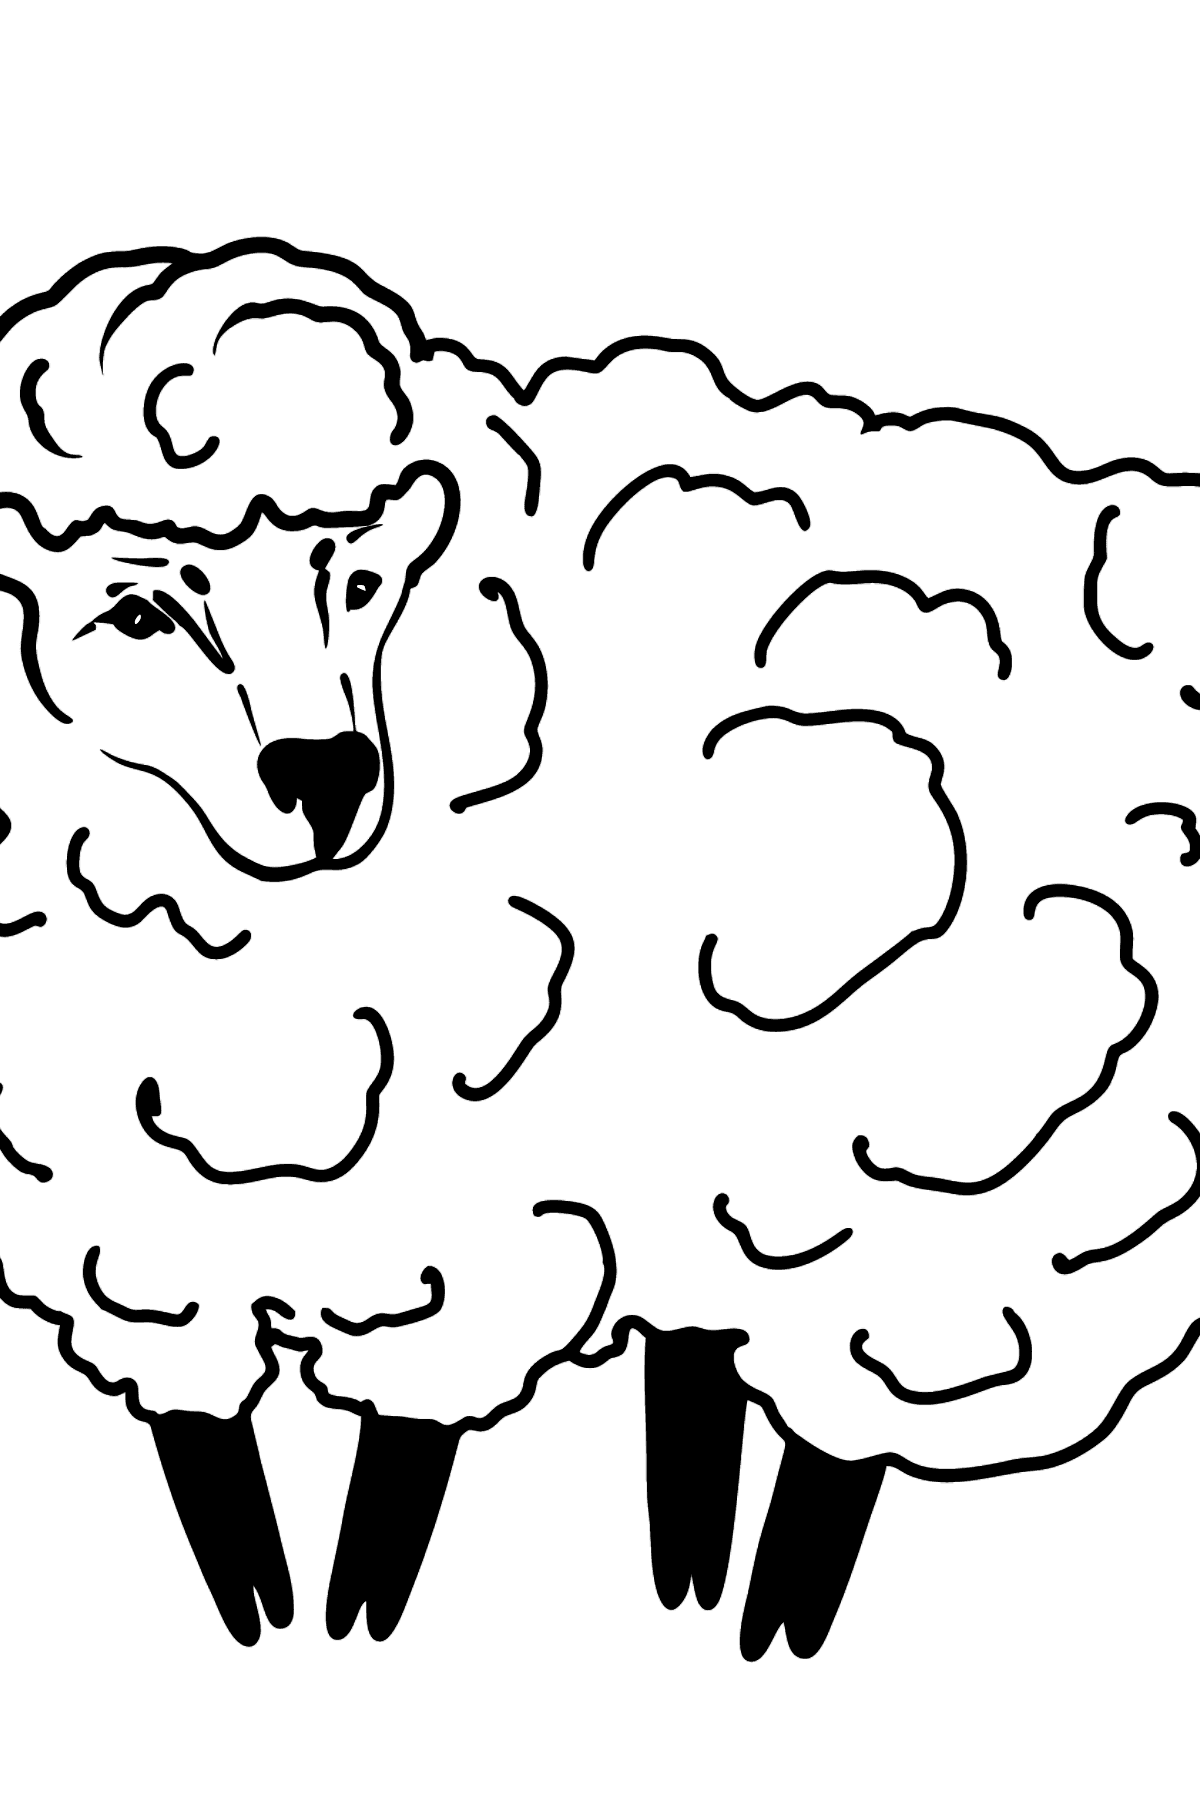 Sheep coloring page - Coloring Pages for Kids